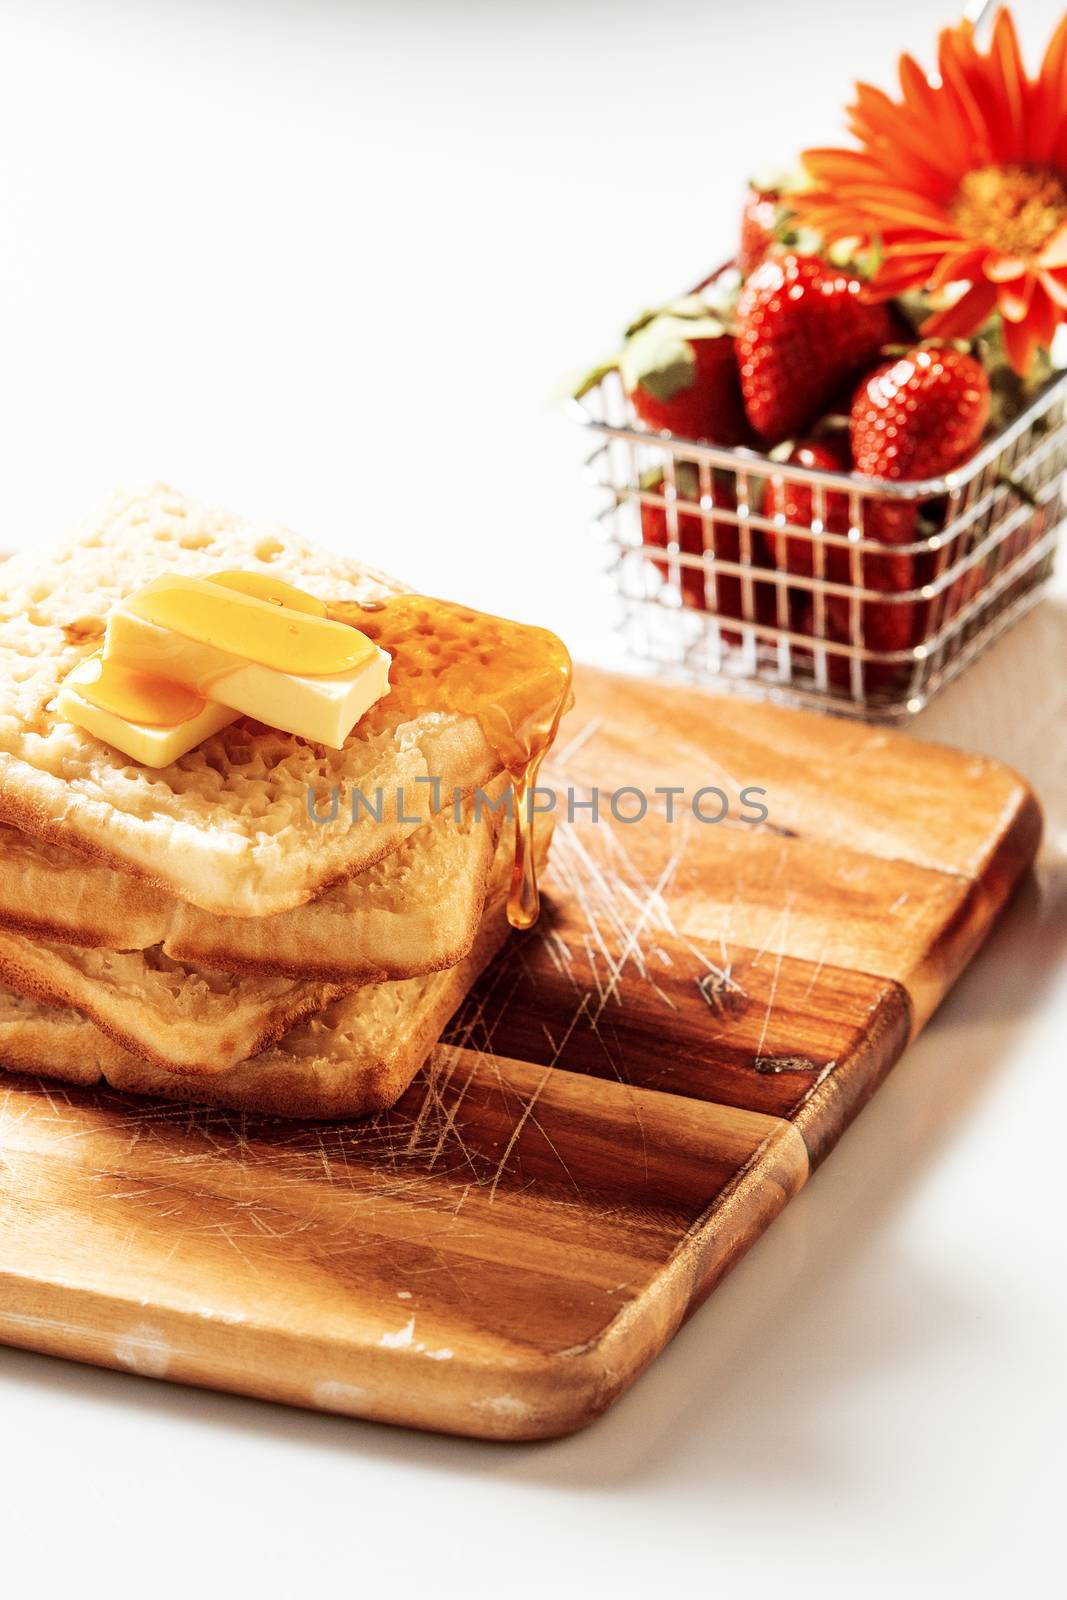 Toasted crumpets with honey drizzled over them and strawberries in the background.